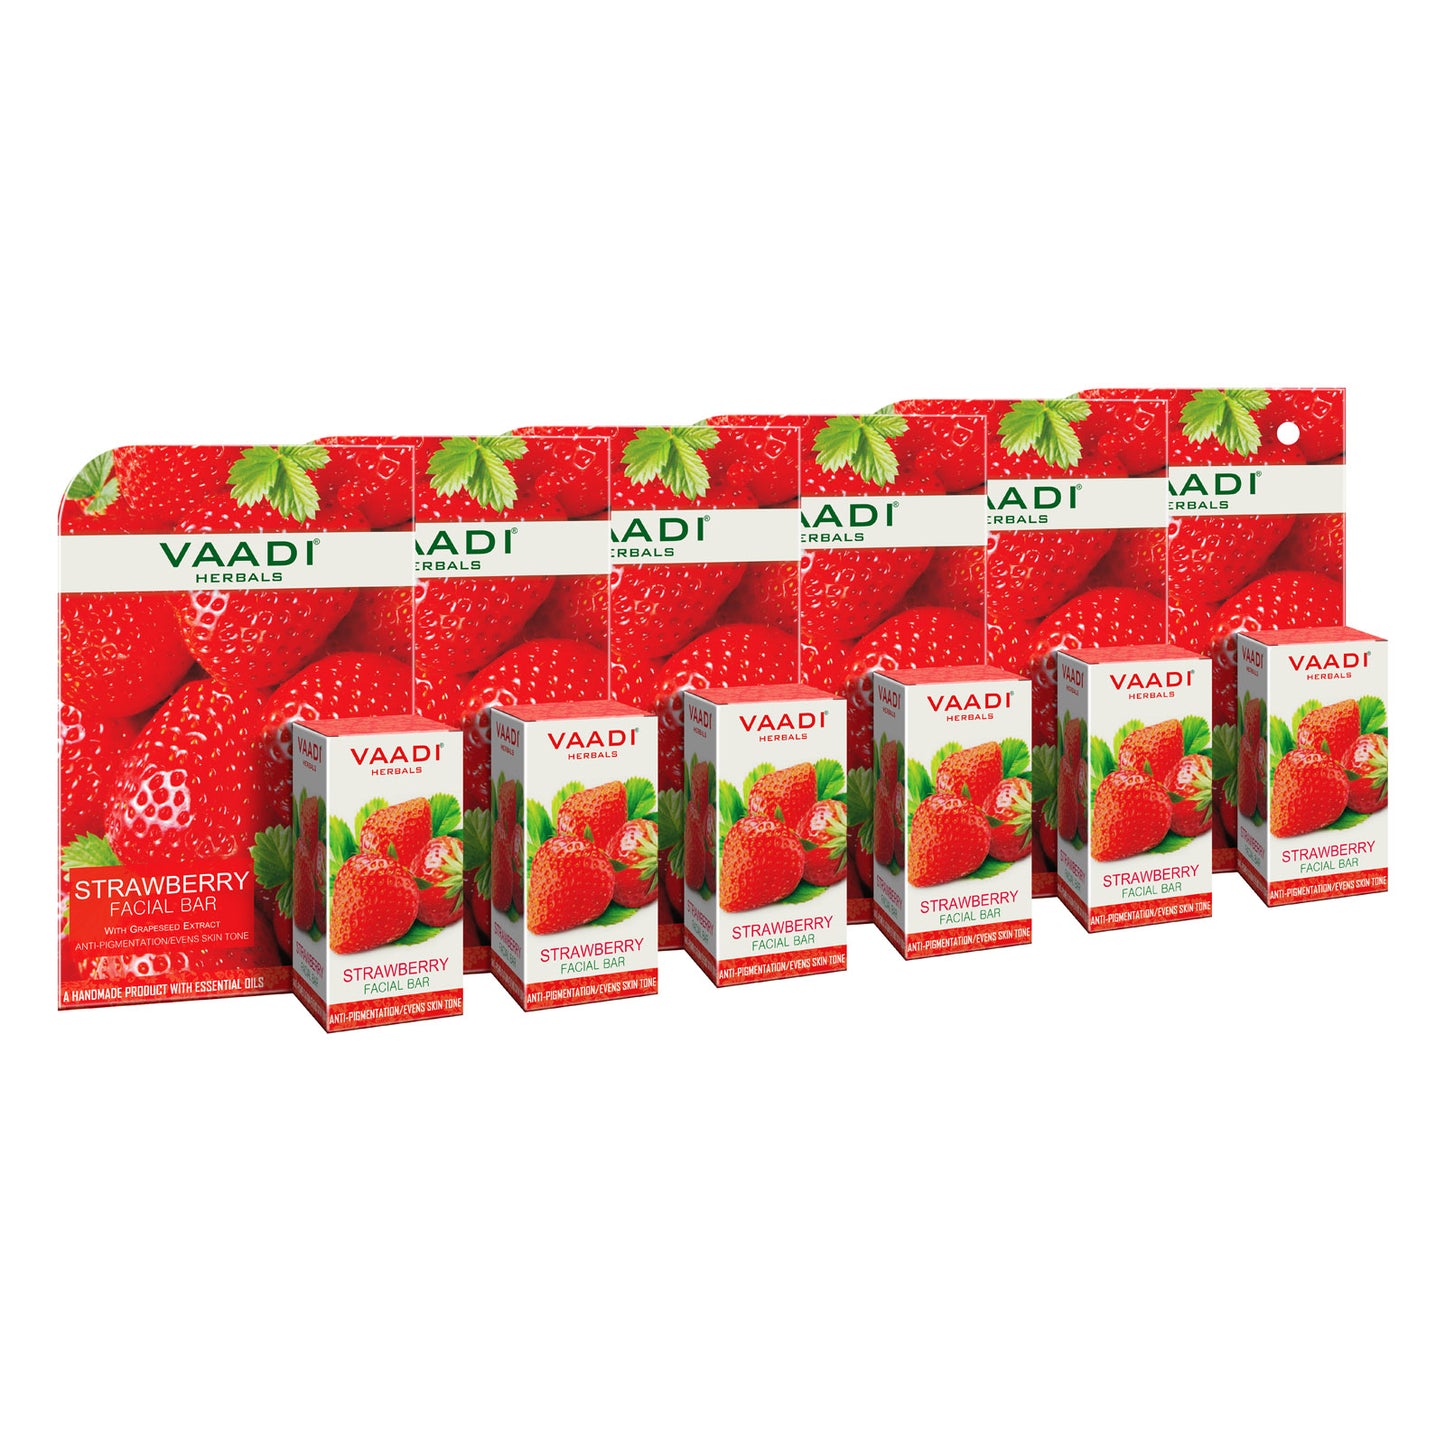 Pack of 6 Strawberry Facial Bars with Grapeseed Extract (25gms x 6)